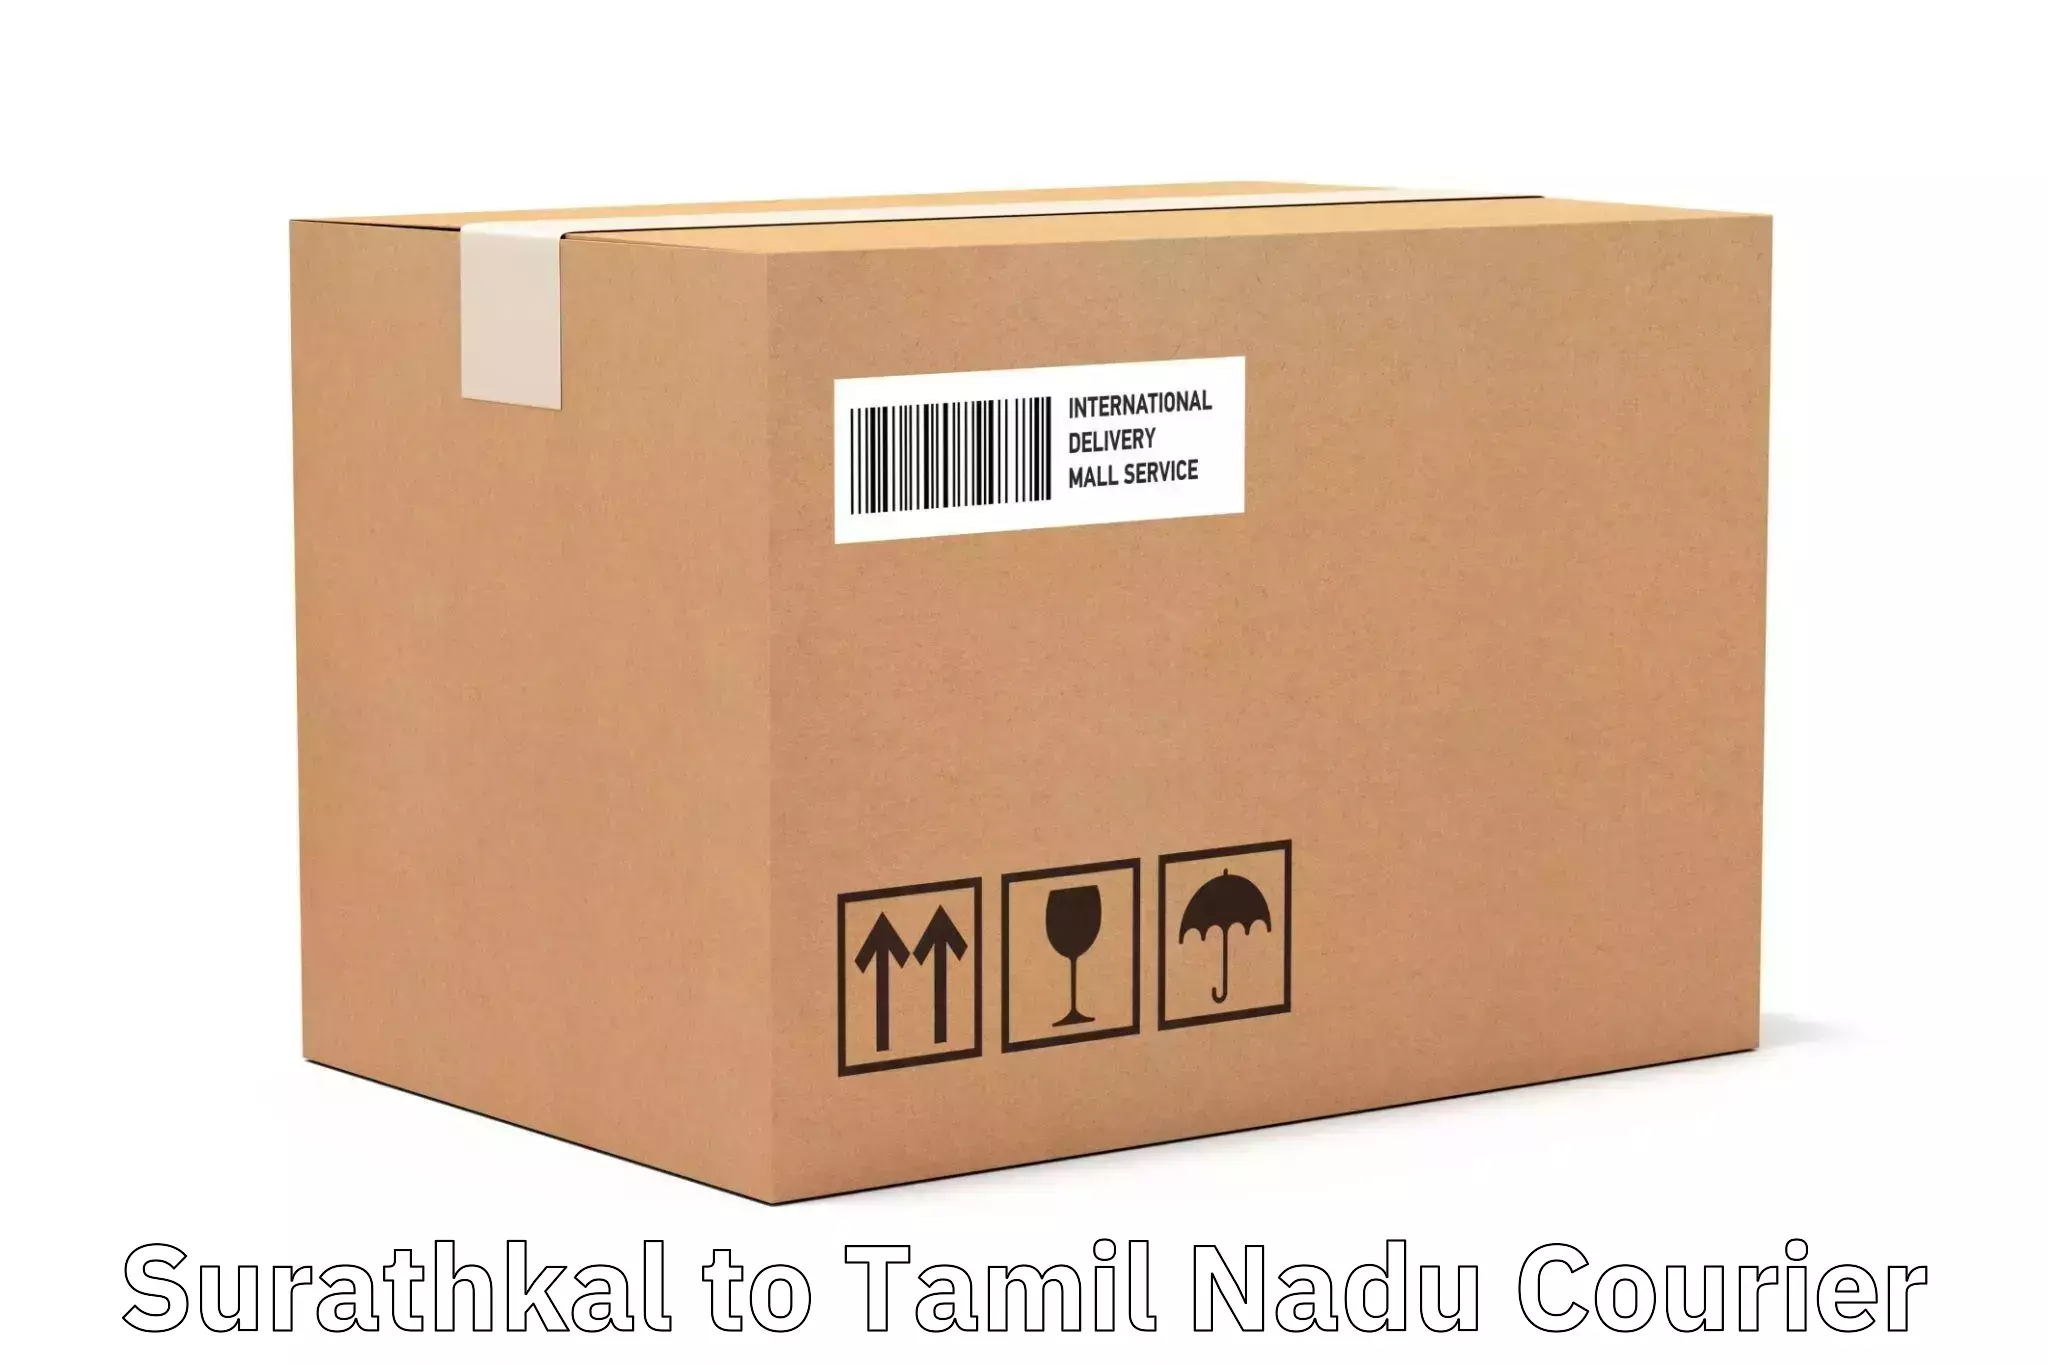 Round-the-clock parcel delivery Surathkal to Mannargudi